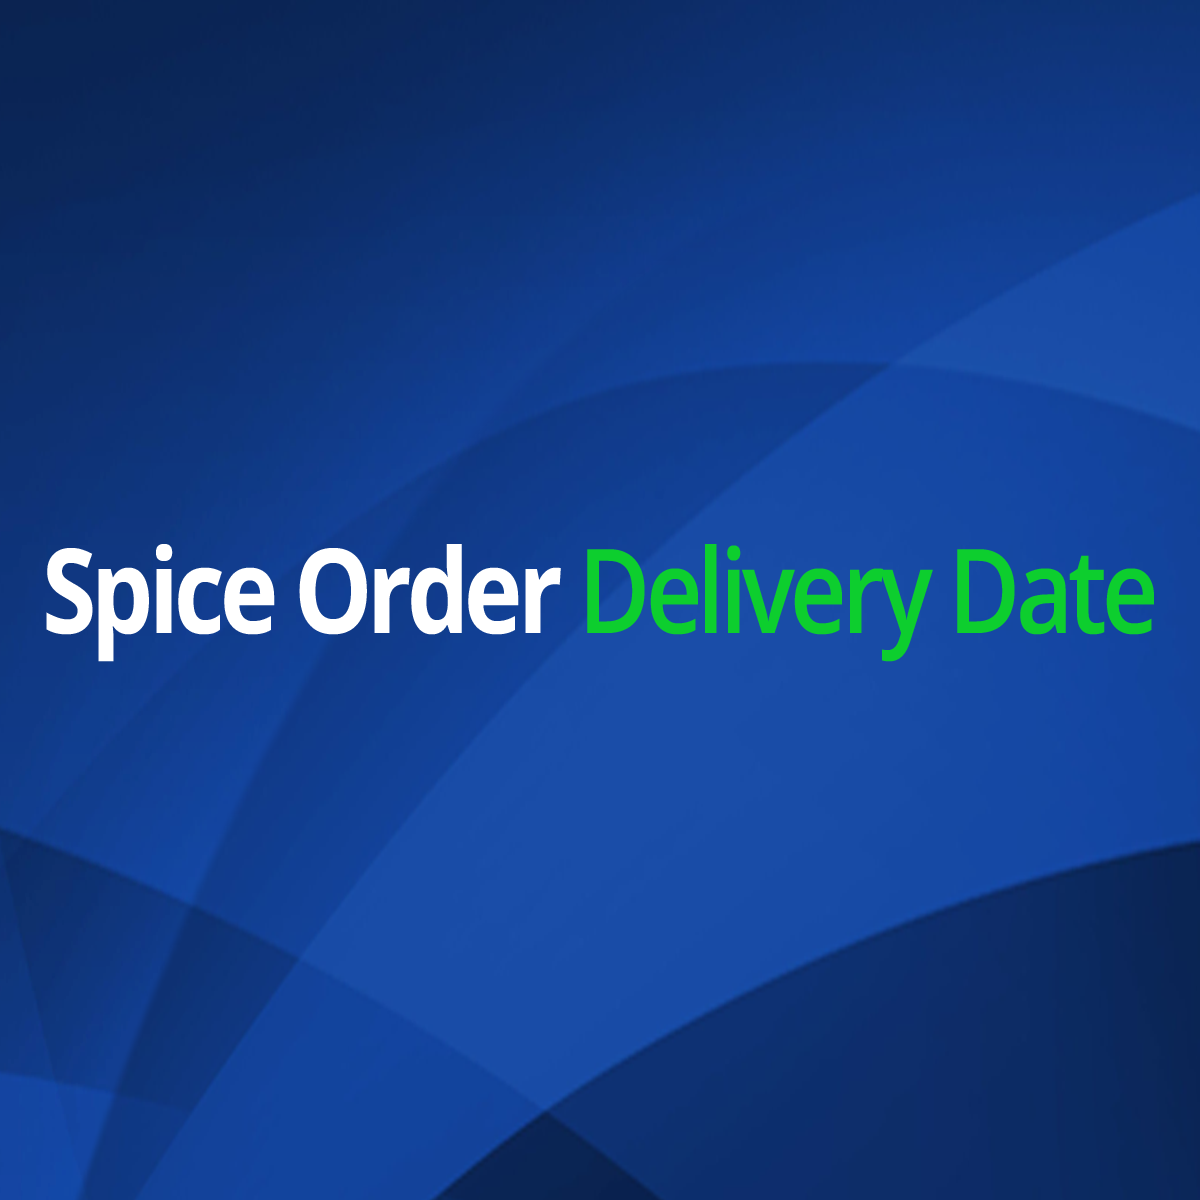 ODD ‑ Order Delivery Date 